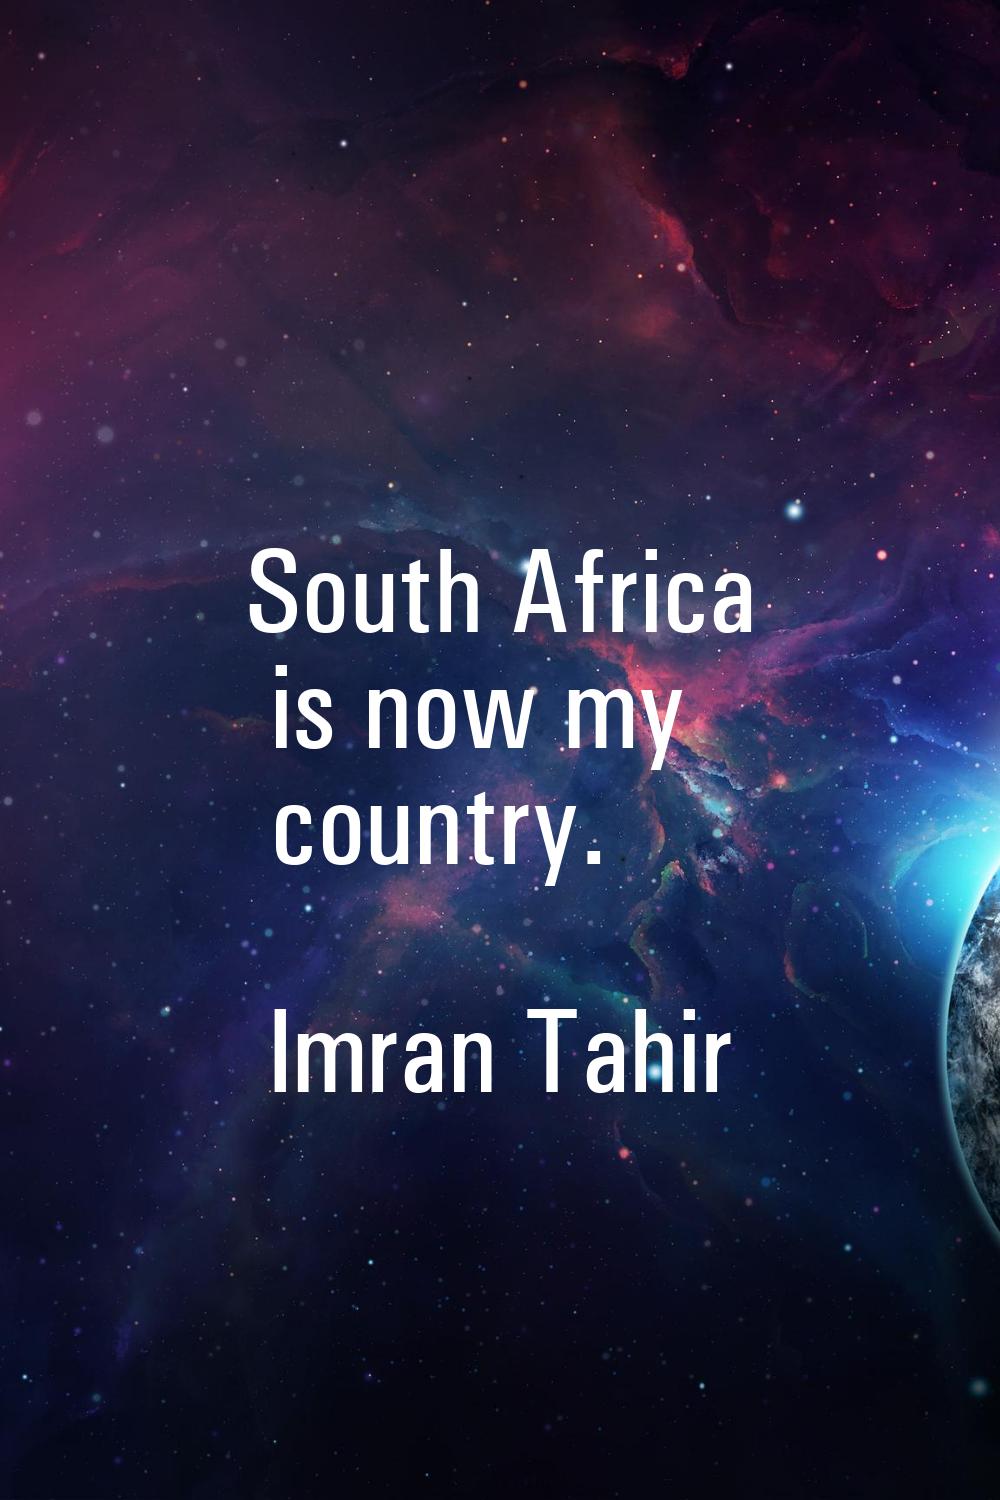 South Africa is now my country.